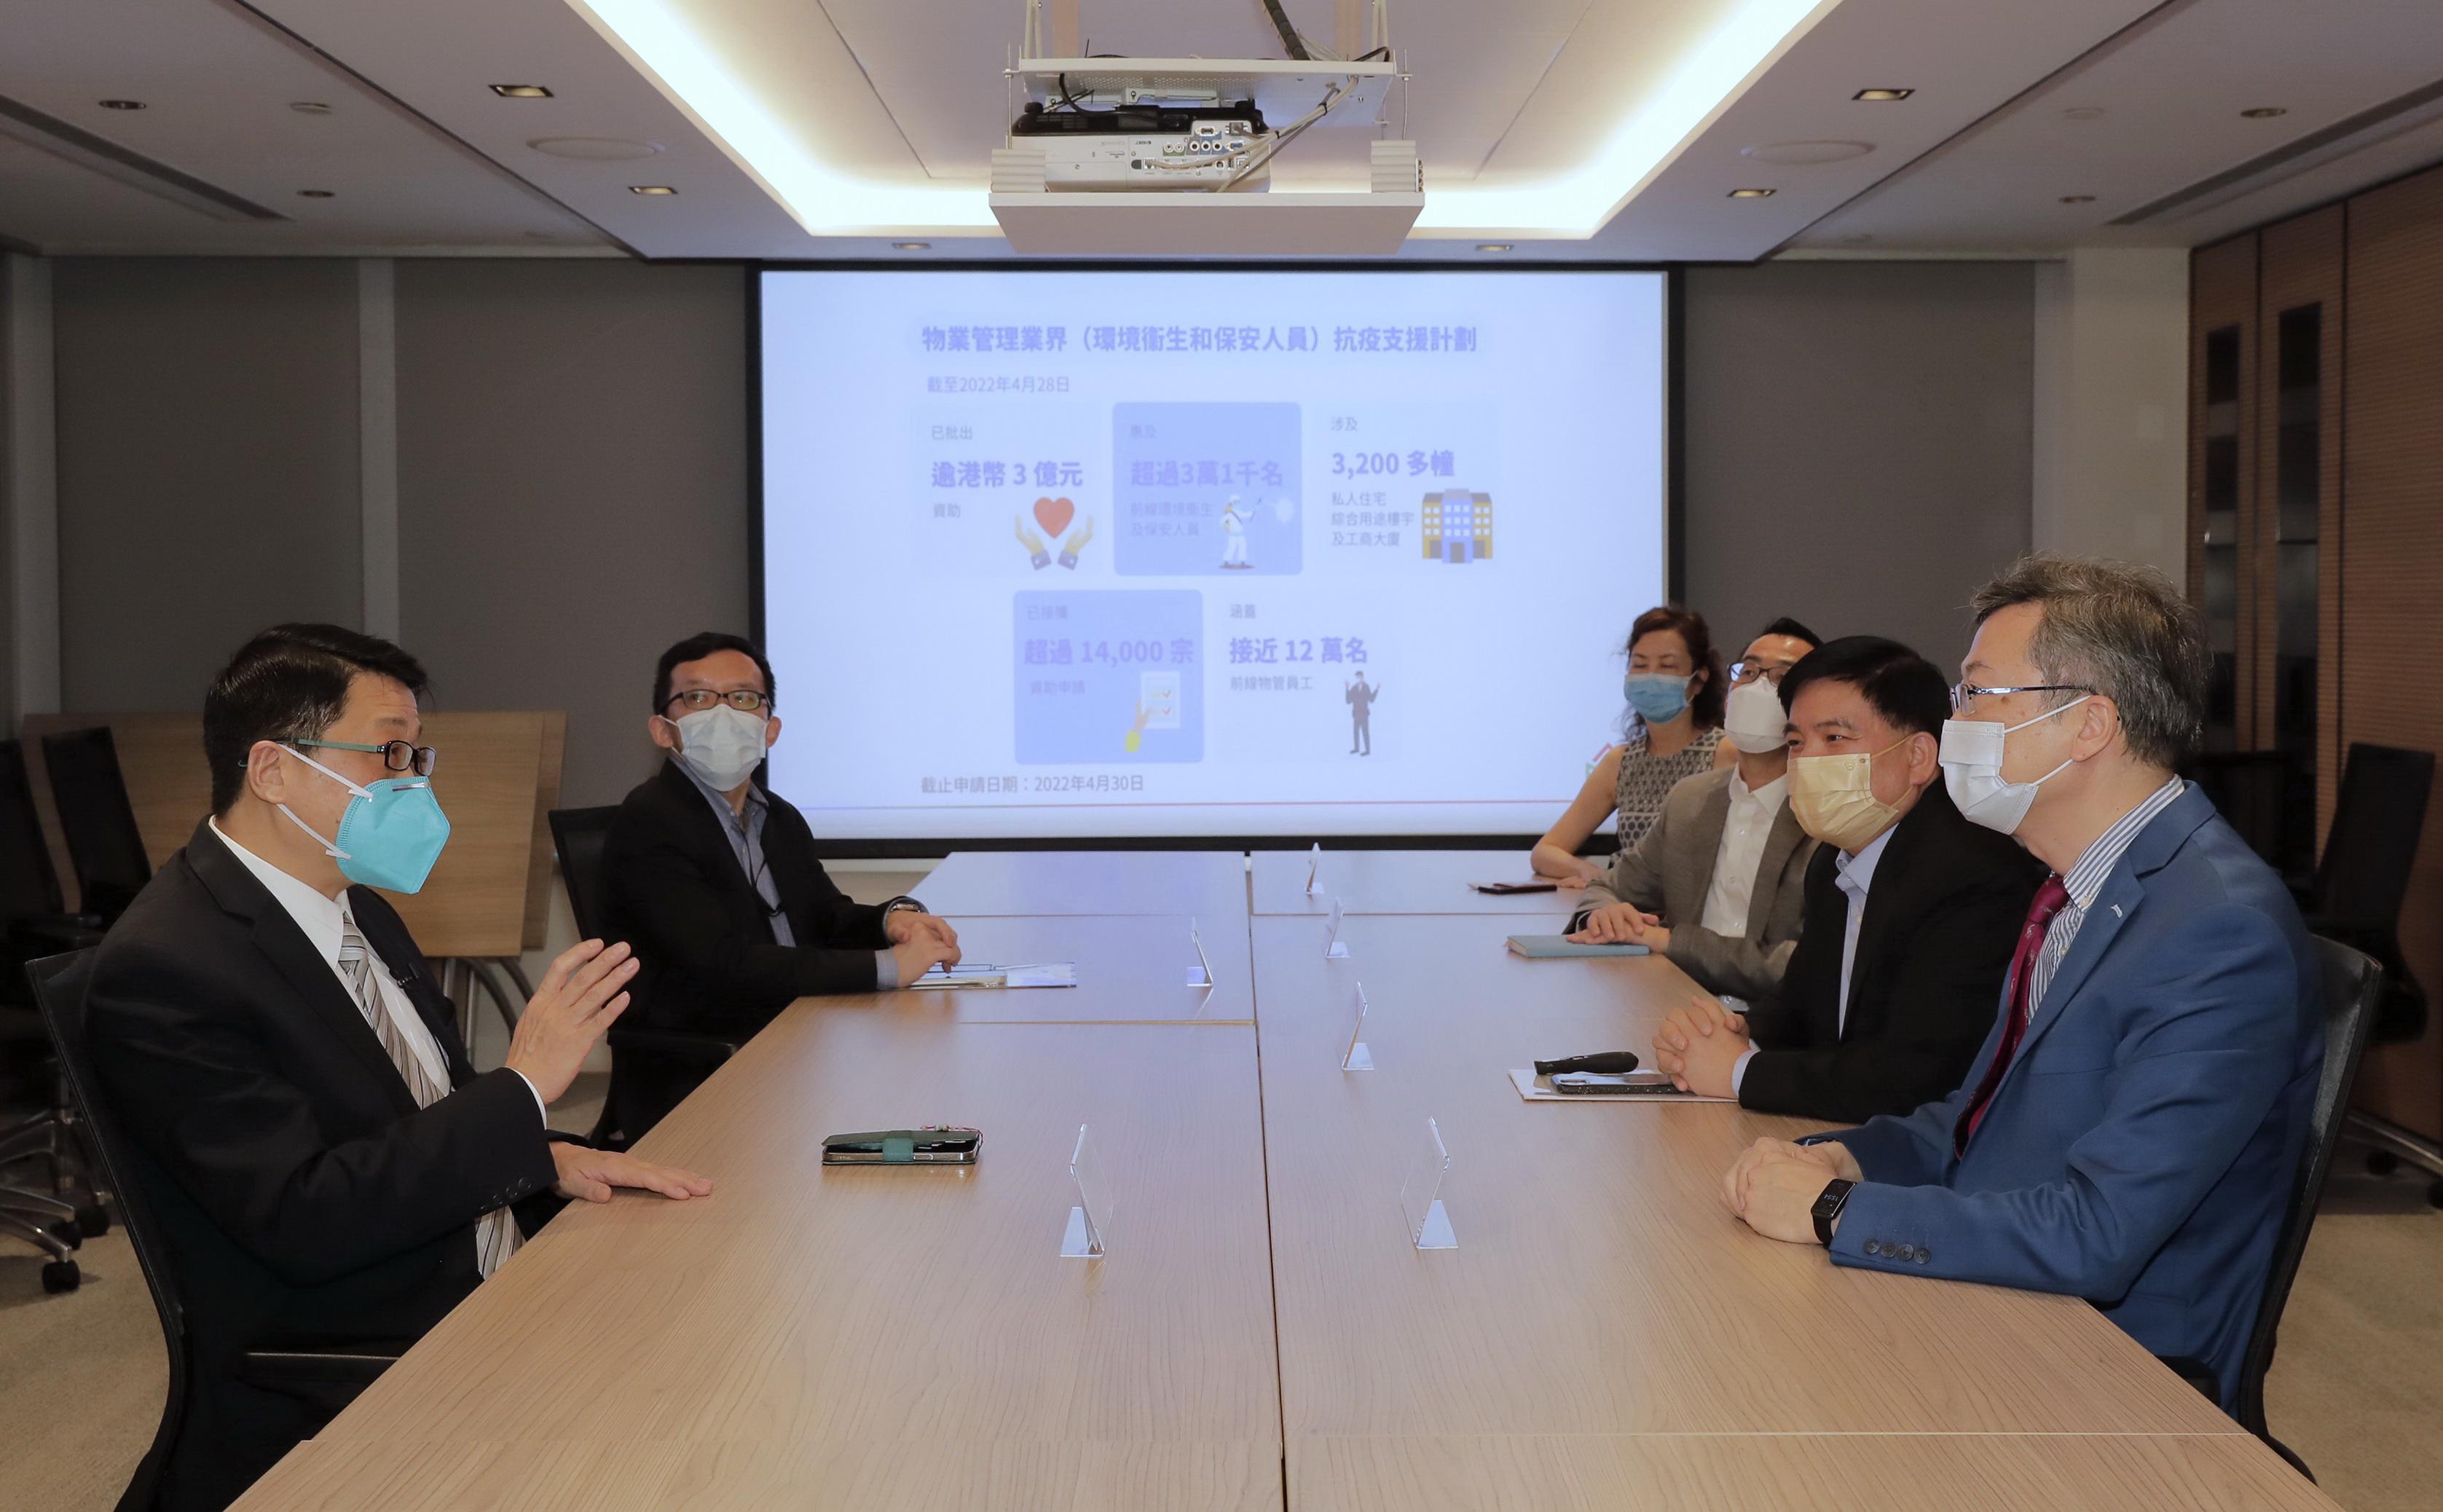 The Acting Secretary for Home Affairs, Mr Jack Chan, today (April 29) visited the Property Management Services Authority (PMSA) which has been commissioned to implement the Anti-epidemic Support Scheme for Environmental Hygiene and Security Staff in Property Management Sector. Picture shows Mr Chan (first left) meeting with the Vice-chairperson of the PMSA, Professor Eddie Hui (first right), and the Chief Executive Officer of the PMSA, Mr Alan Siu (second right), to understand the implementation of the Scheme.